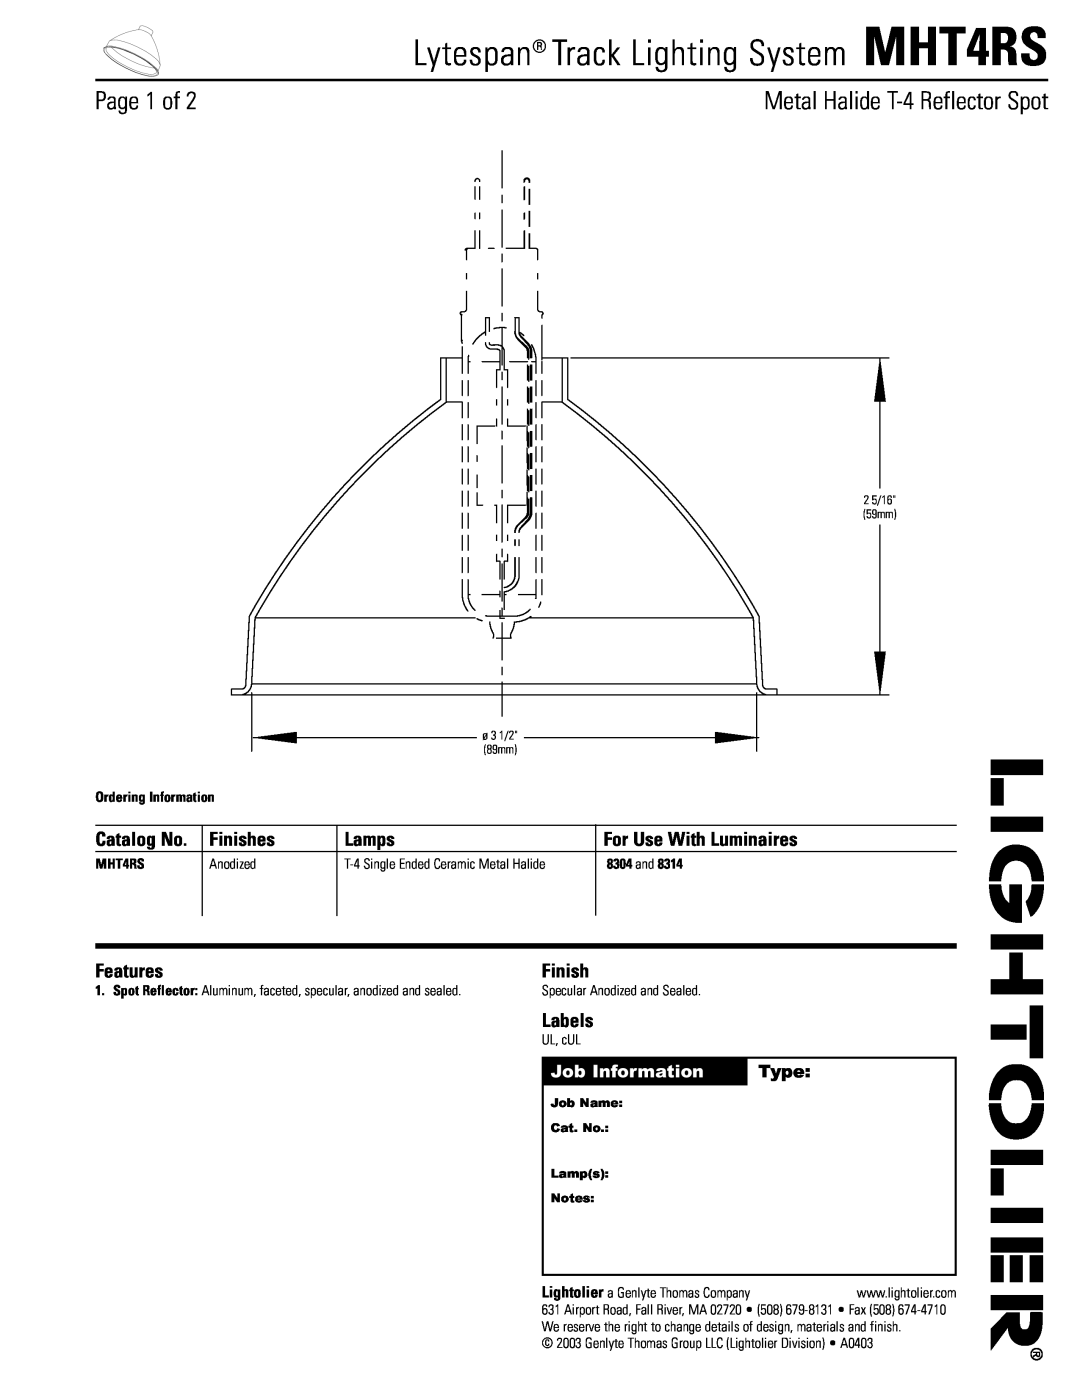 Lightolier manual Lytespan Track Lighting System MHT4RS, Finishes, Lamps, For Use With Luminaires, Features, Labels 